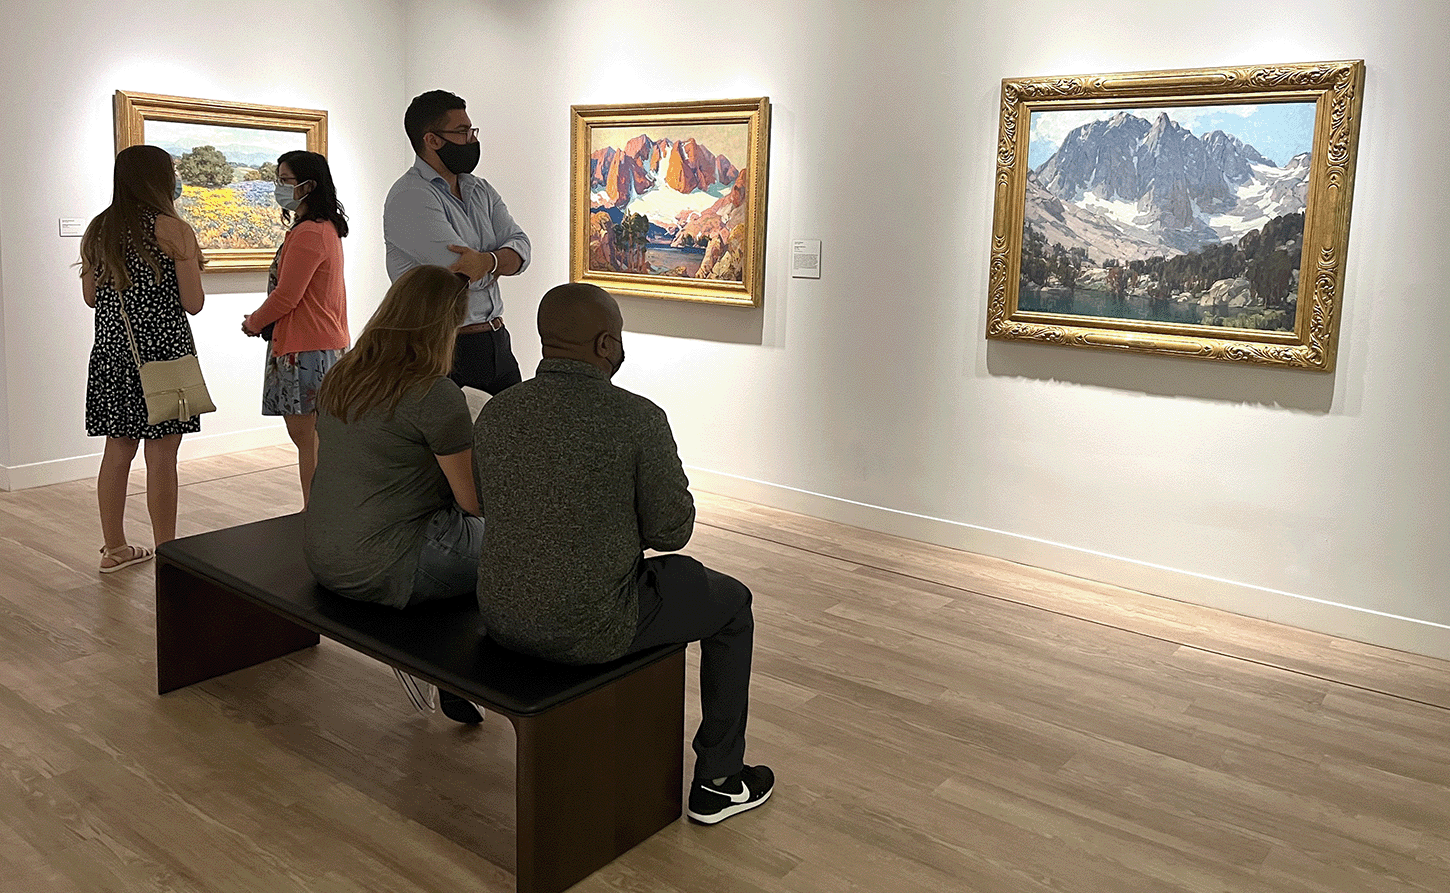 Installation view with visitors, <em>Variations of Place: Southern California Impressionism in the Early 20th Century</em>, 2022, Photo by Julie Delliquanti ©The Regents of the University of California